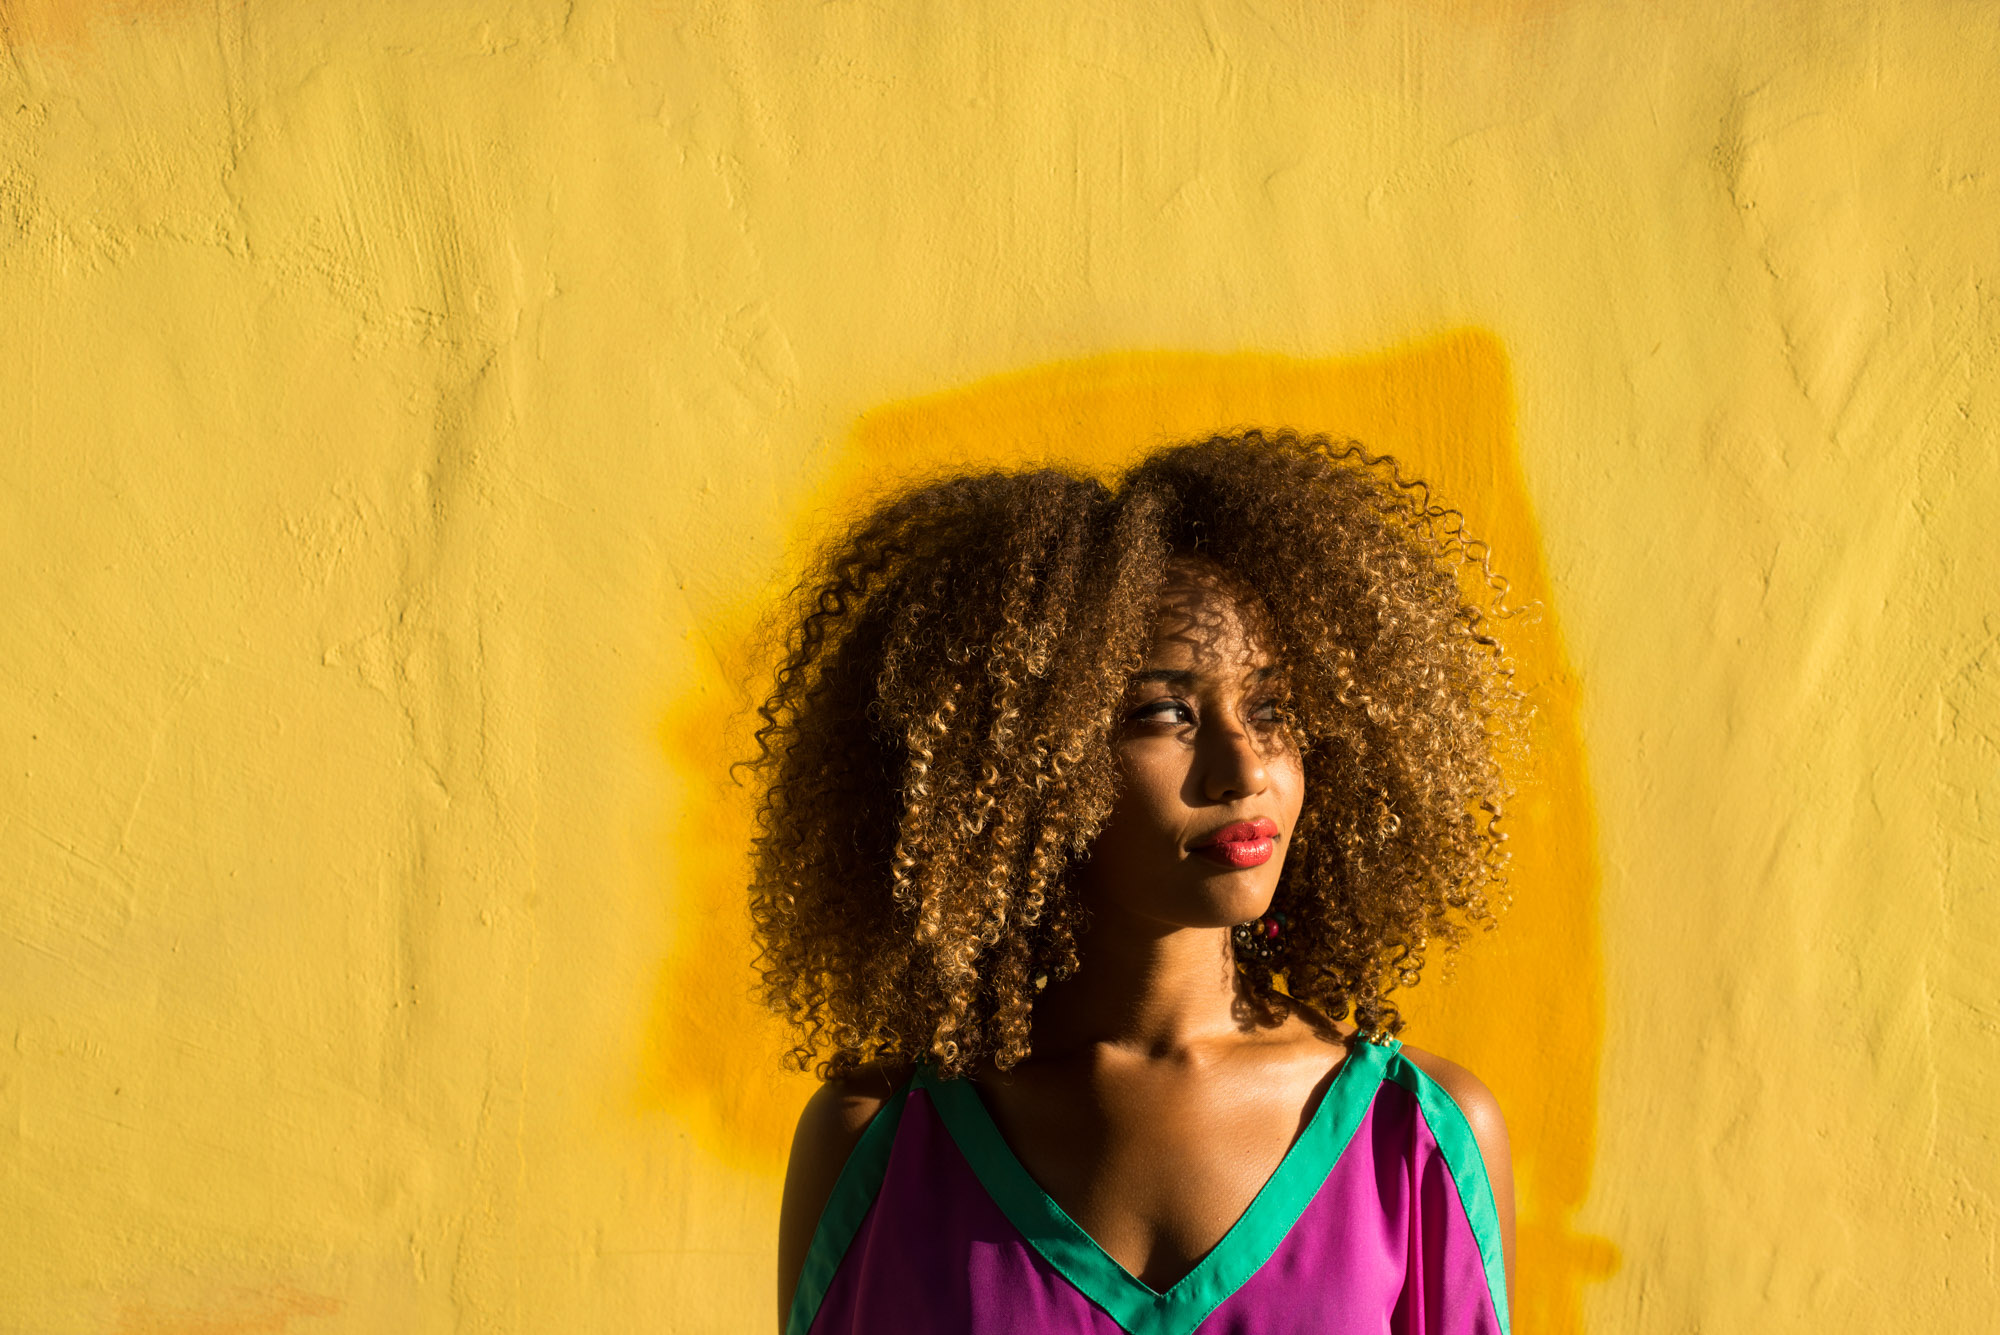 Los Angeles Portrait Photographer David Zentz - photo of a woman posed against yellow wall in Venice Beach, Calif.